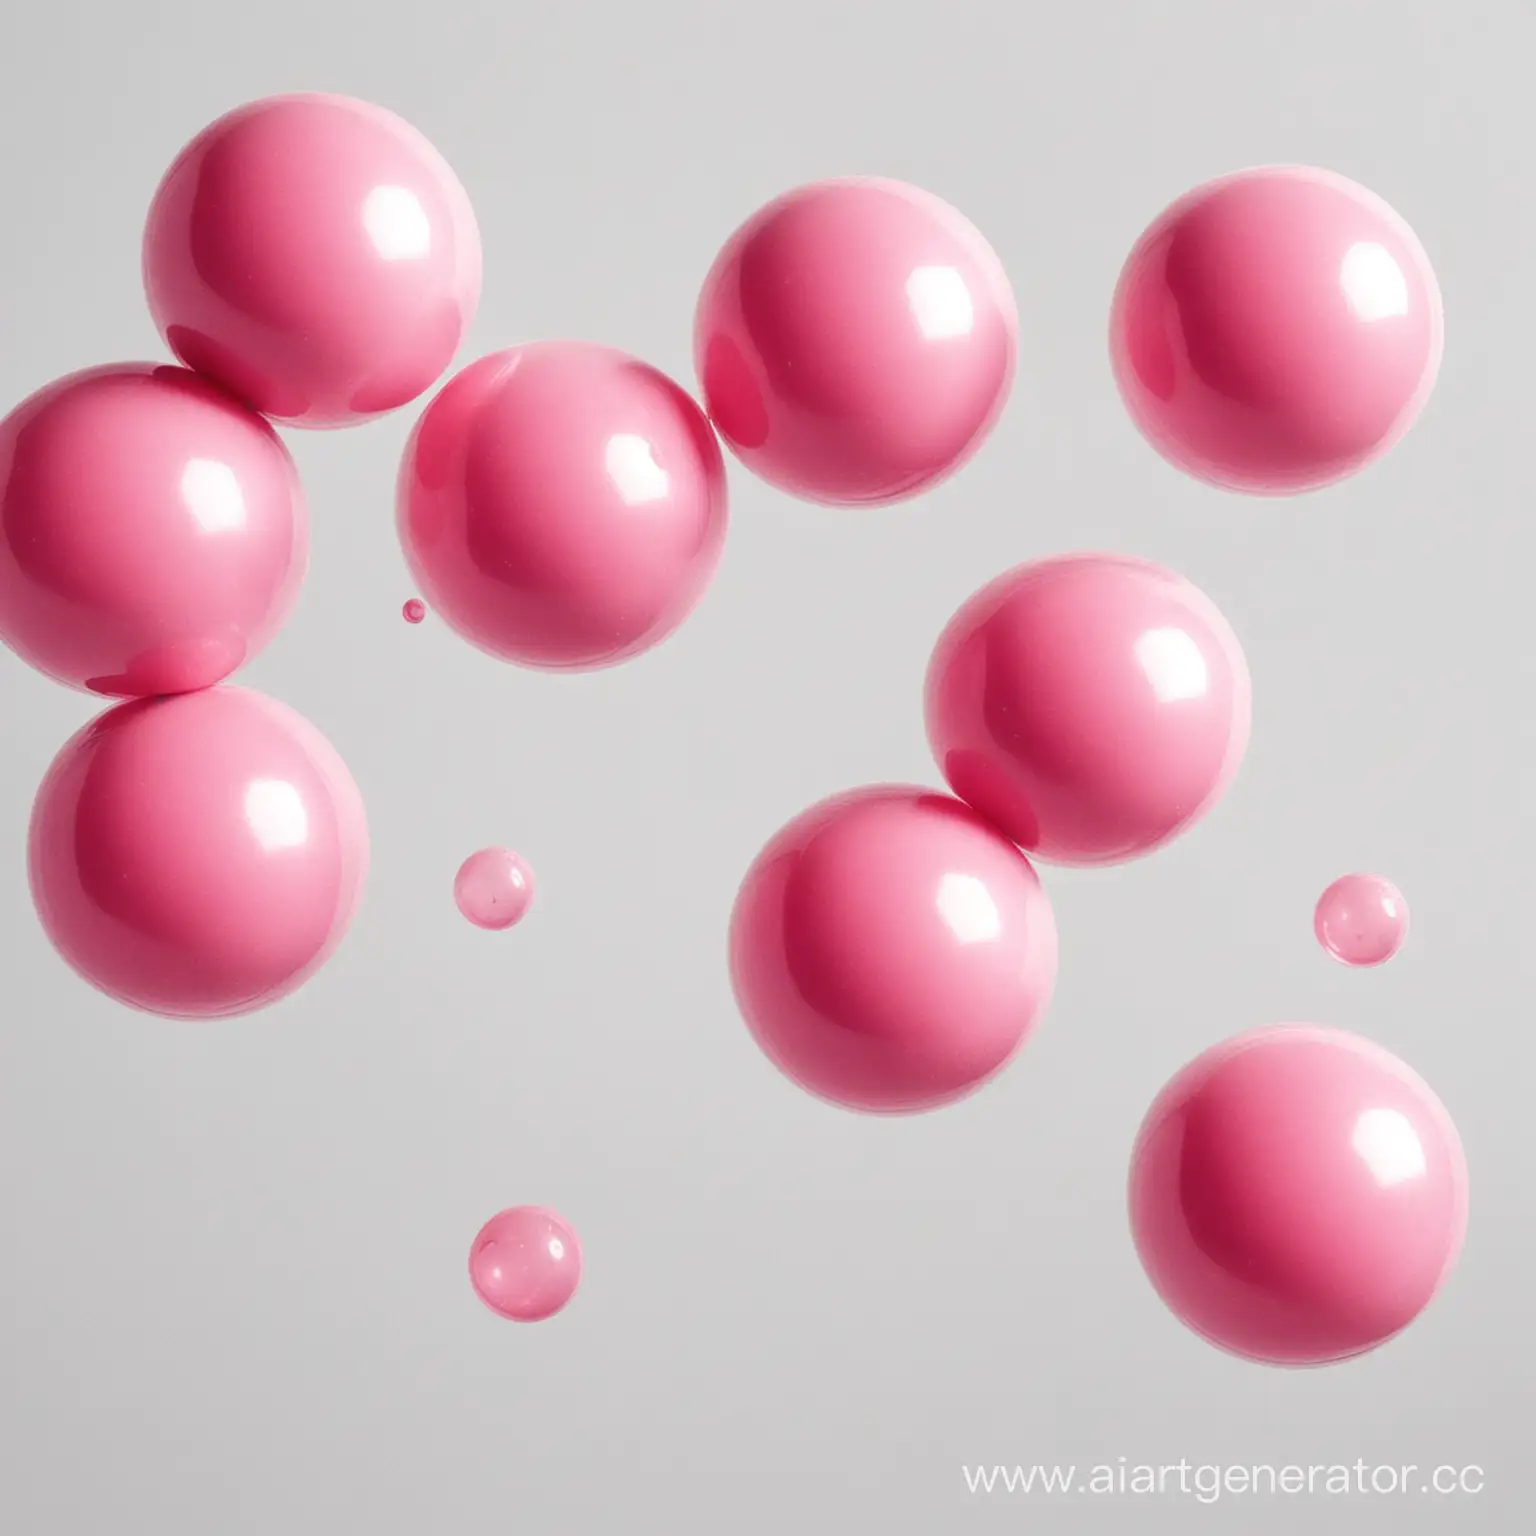 Pink-Bubble-Gum-Balls-on-Clean-White-Background